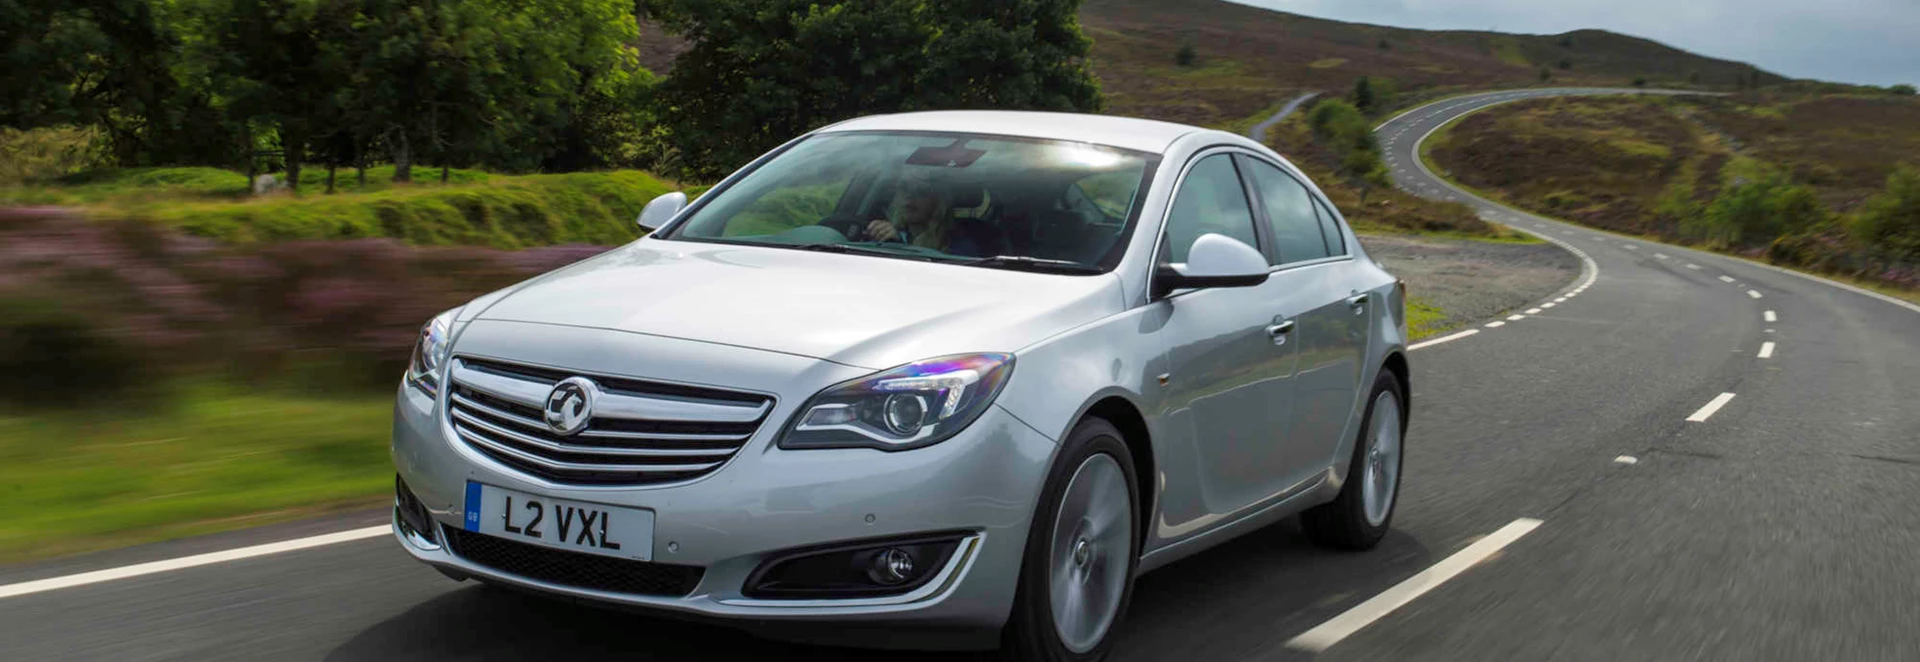 Vauxhall Insignia hatchback review 